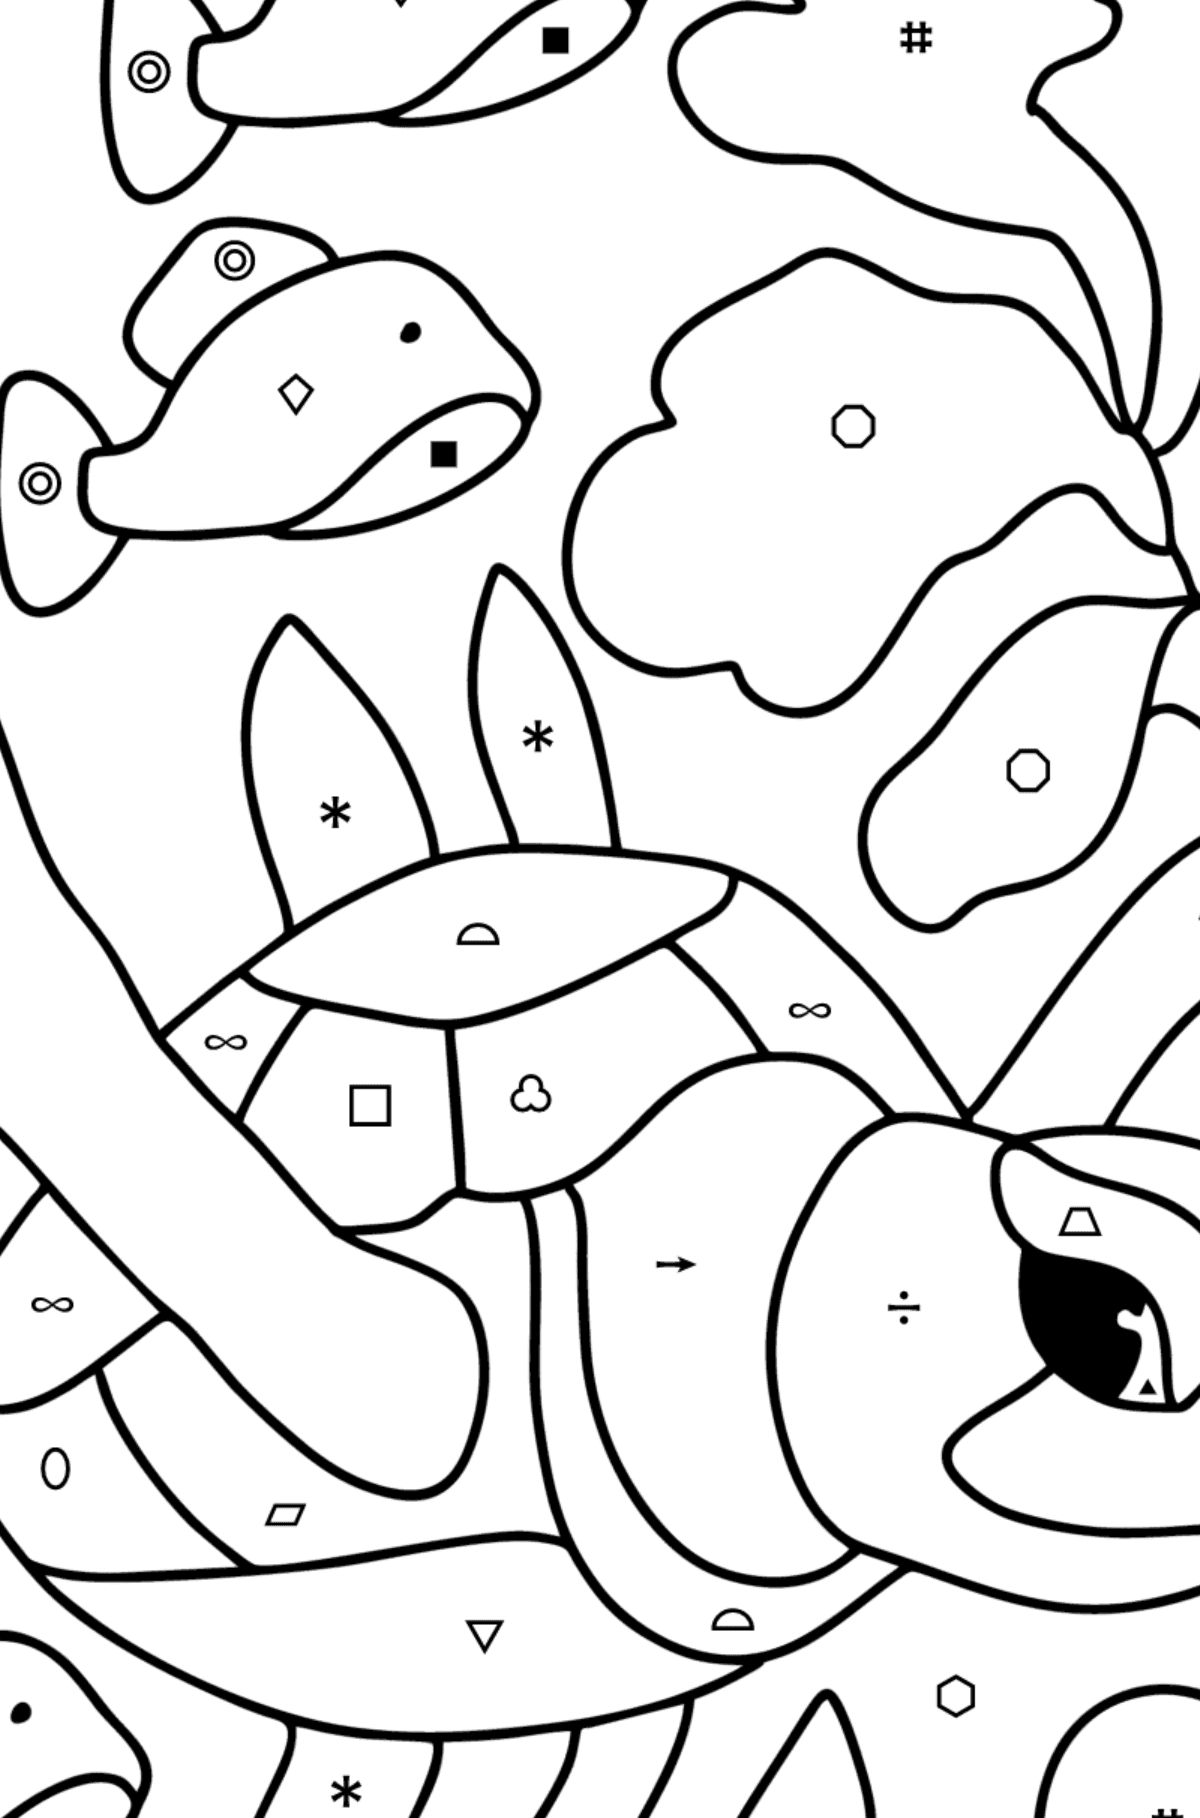 Sea turtle coloring page - Coloring by Symbols and Geometric Shapes for Kids